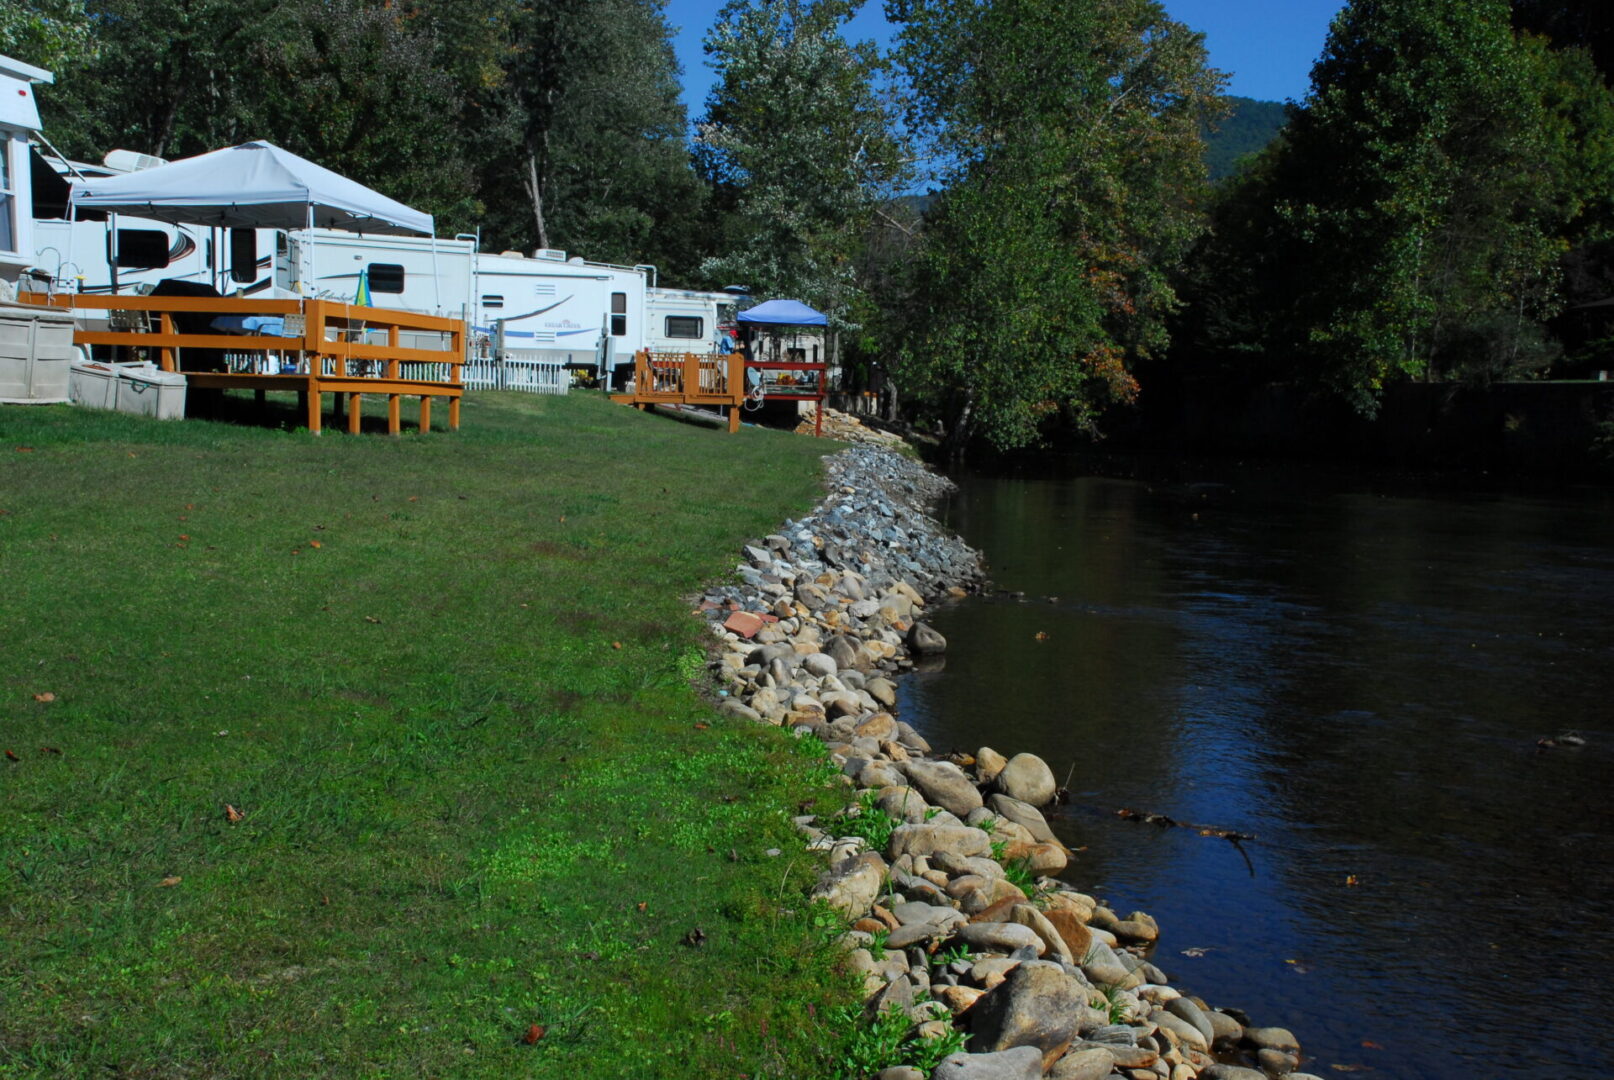 A trailer park on a riverbank